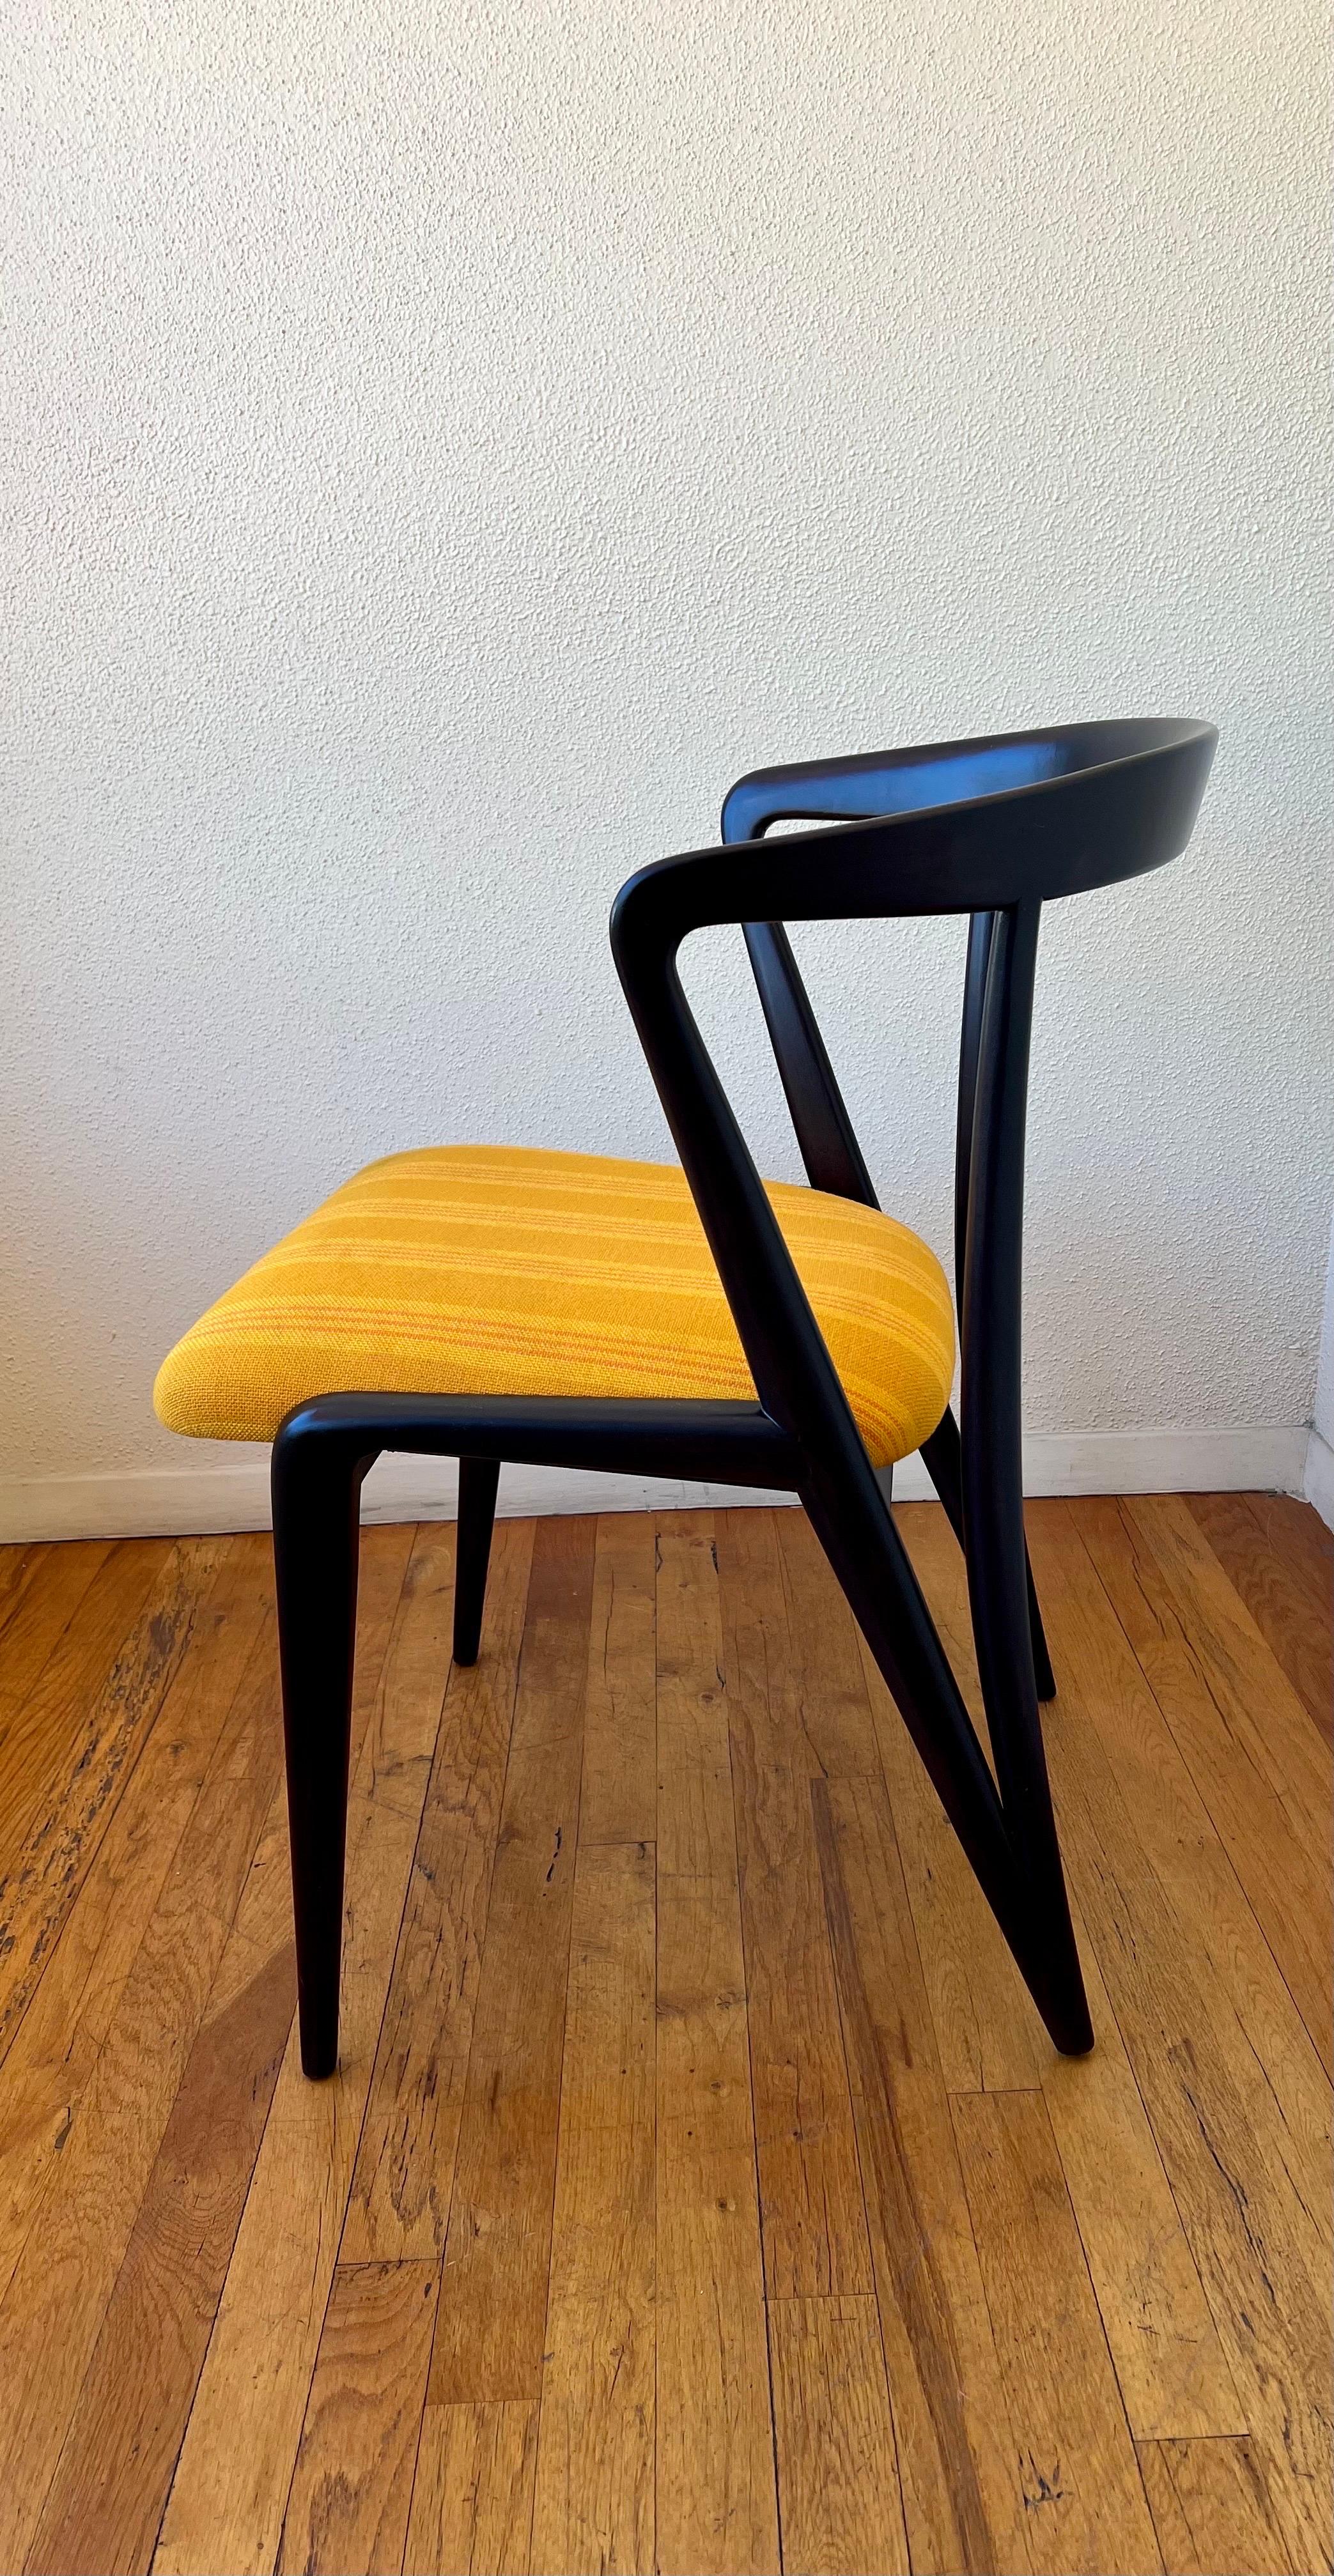 Italian Mid-Century Modern Rare Chair by Bertha Schaefer for Singer & Sons Lacquer For Sale